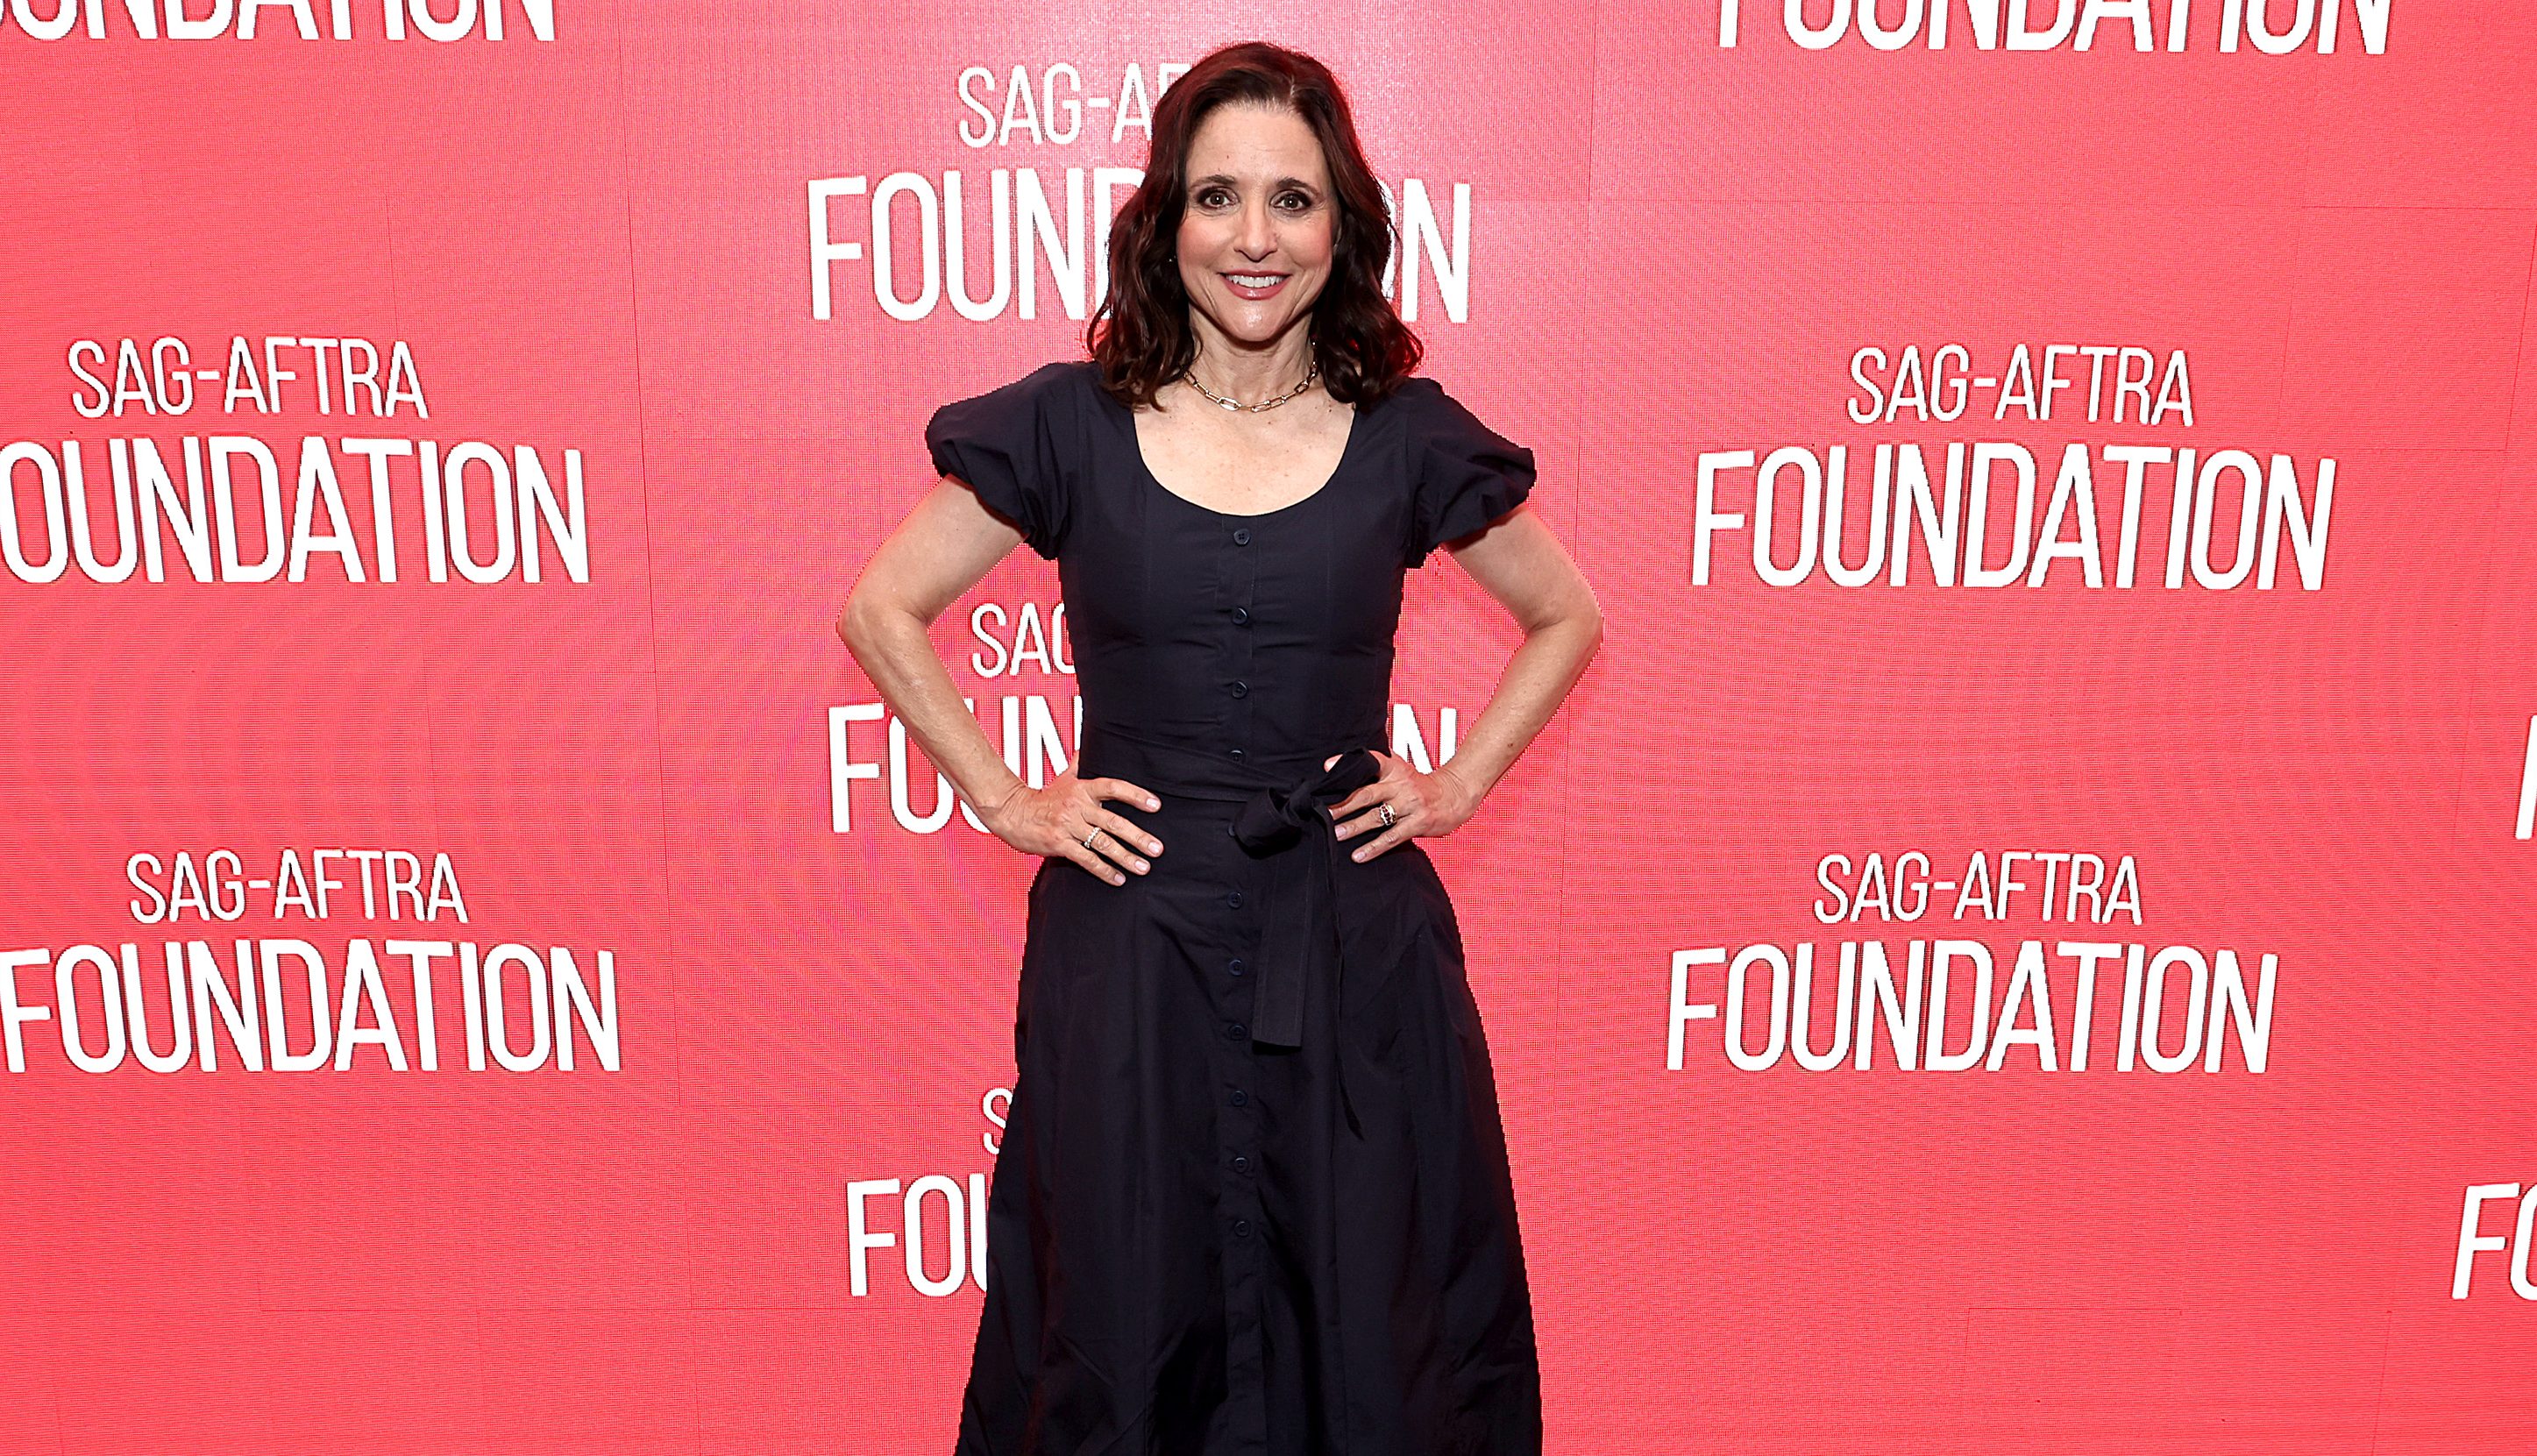 NEW YORK, NEW YORK - JUNE 05: Julia Louis-Dreyfus attends SAG-AFTRA Foundation Conversations "Tuesday" at SAG-AFTRA Foundation Robin Williams Center on June 05, 2024 in New York City. (Photo by Jamie McCarthy/Getty Images)